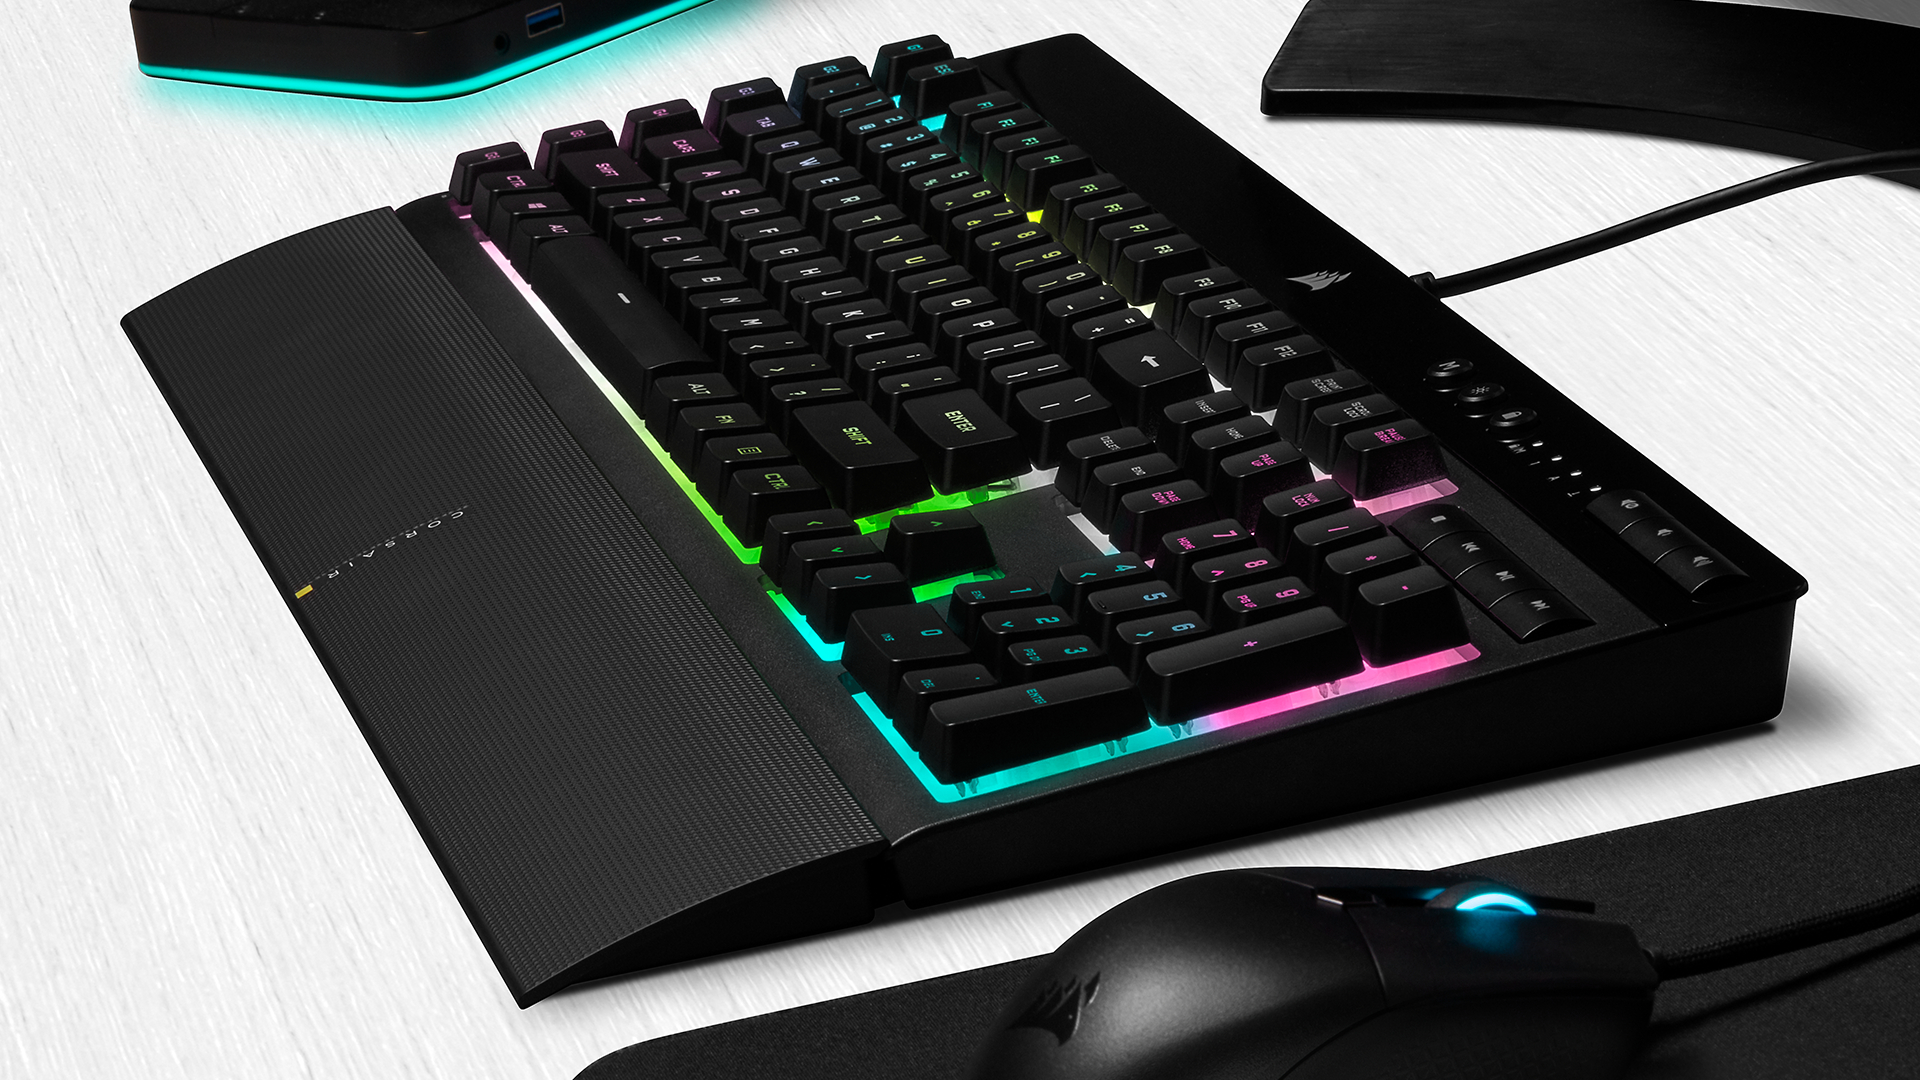 Corsair K55 RGB Pro XT review: "Extra personalization at the expense of speed" |